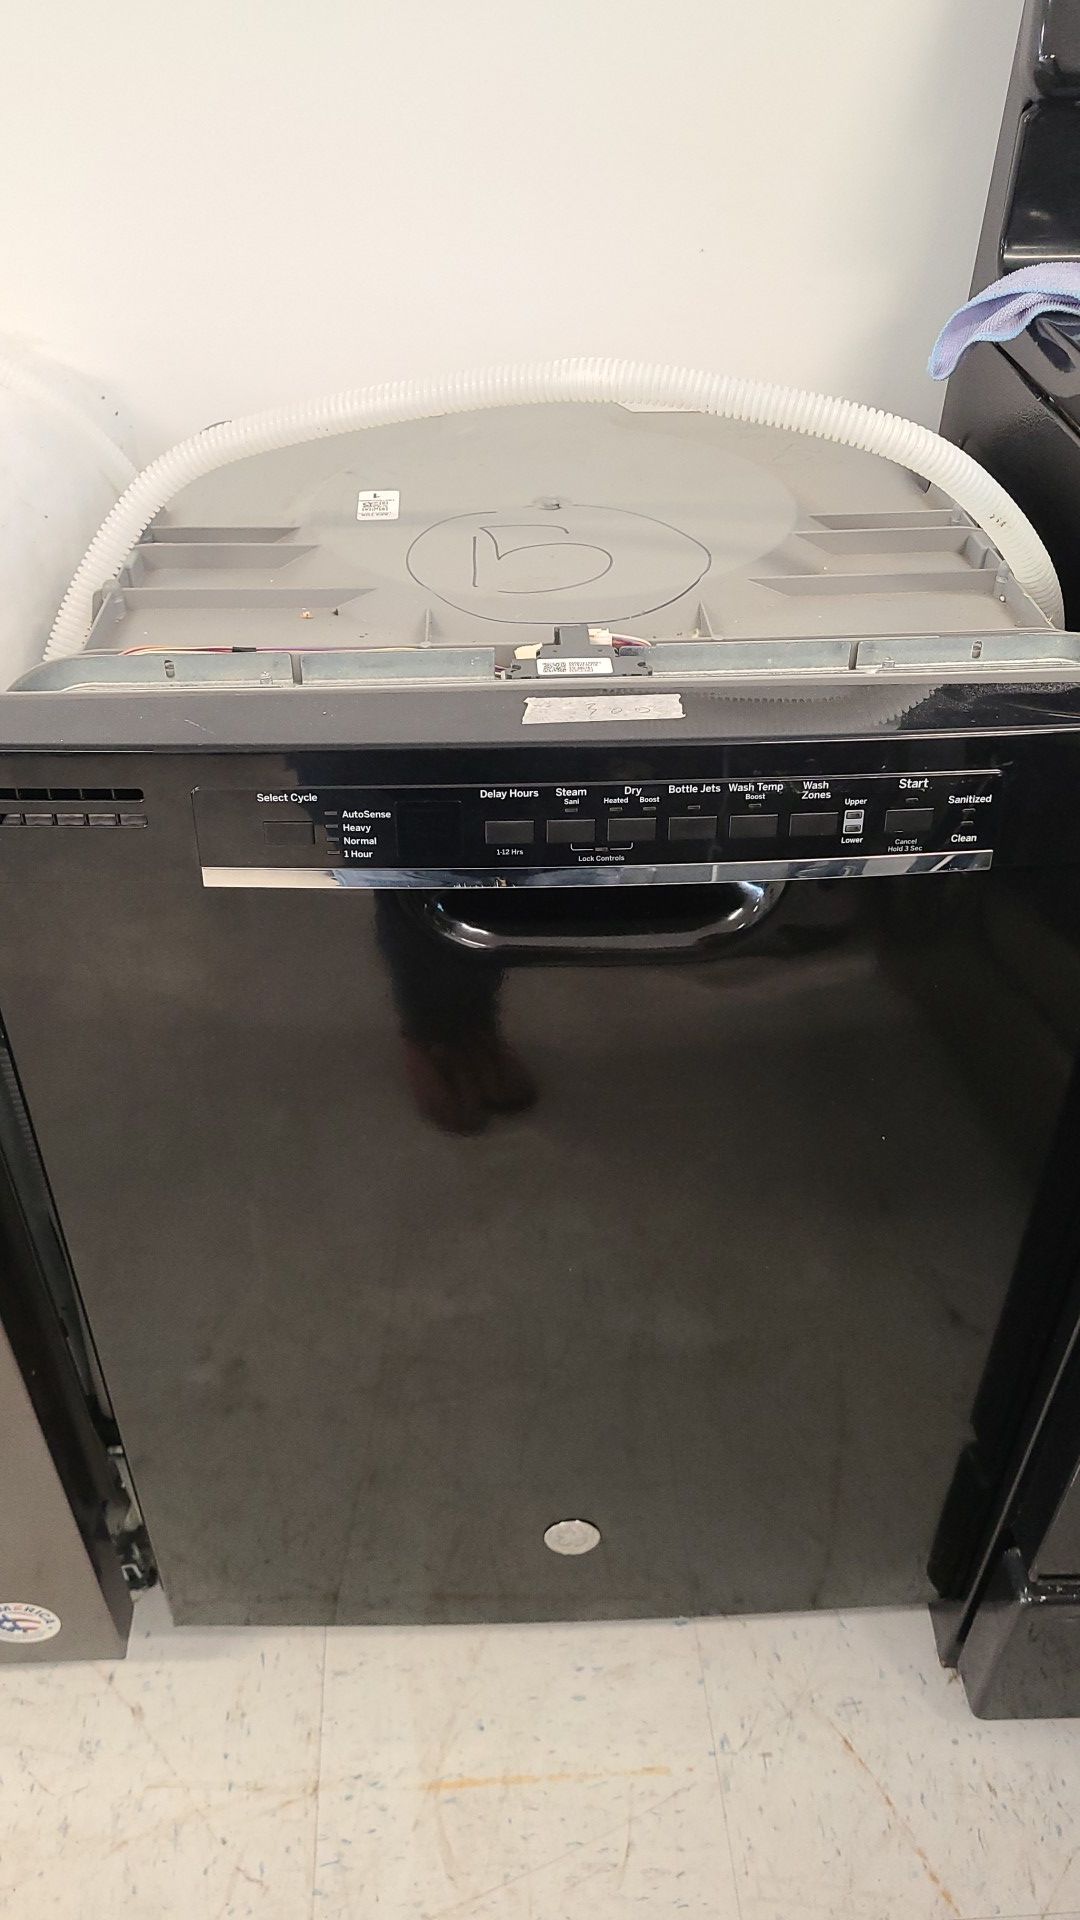 Ge dishwasher new with 6 month's warranty